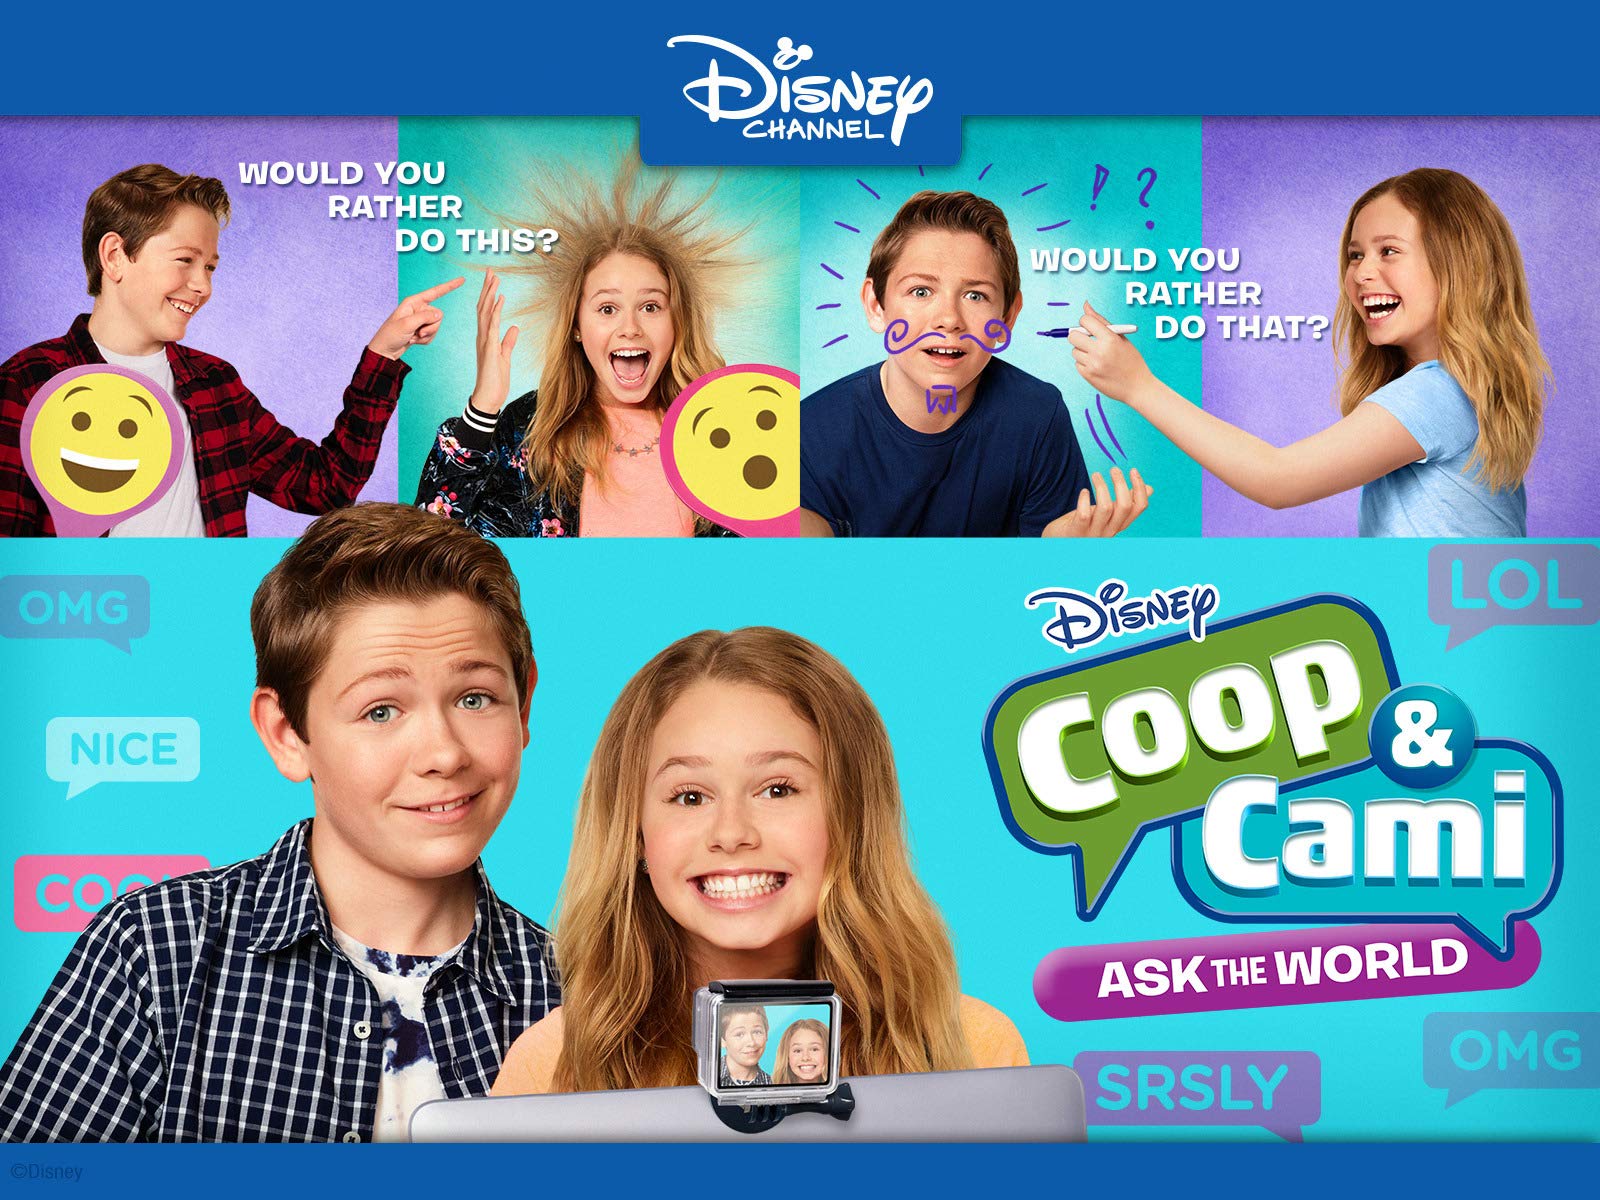 Celebrate Christmas With Disney Channel's Coop & Cami